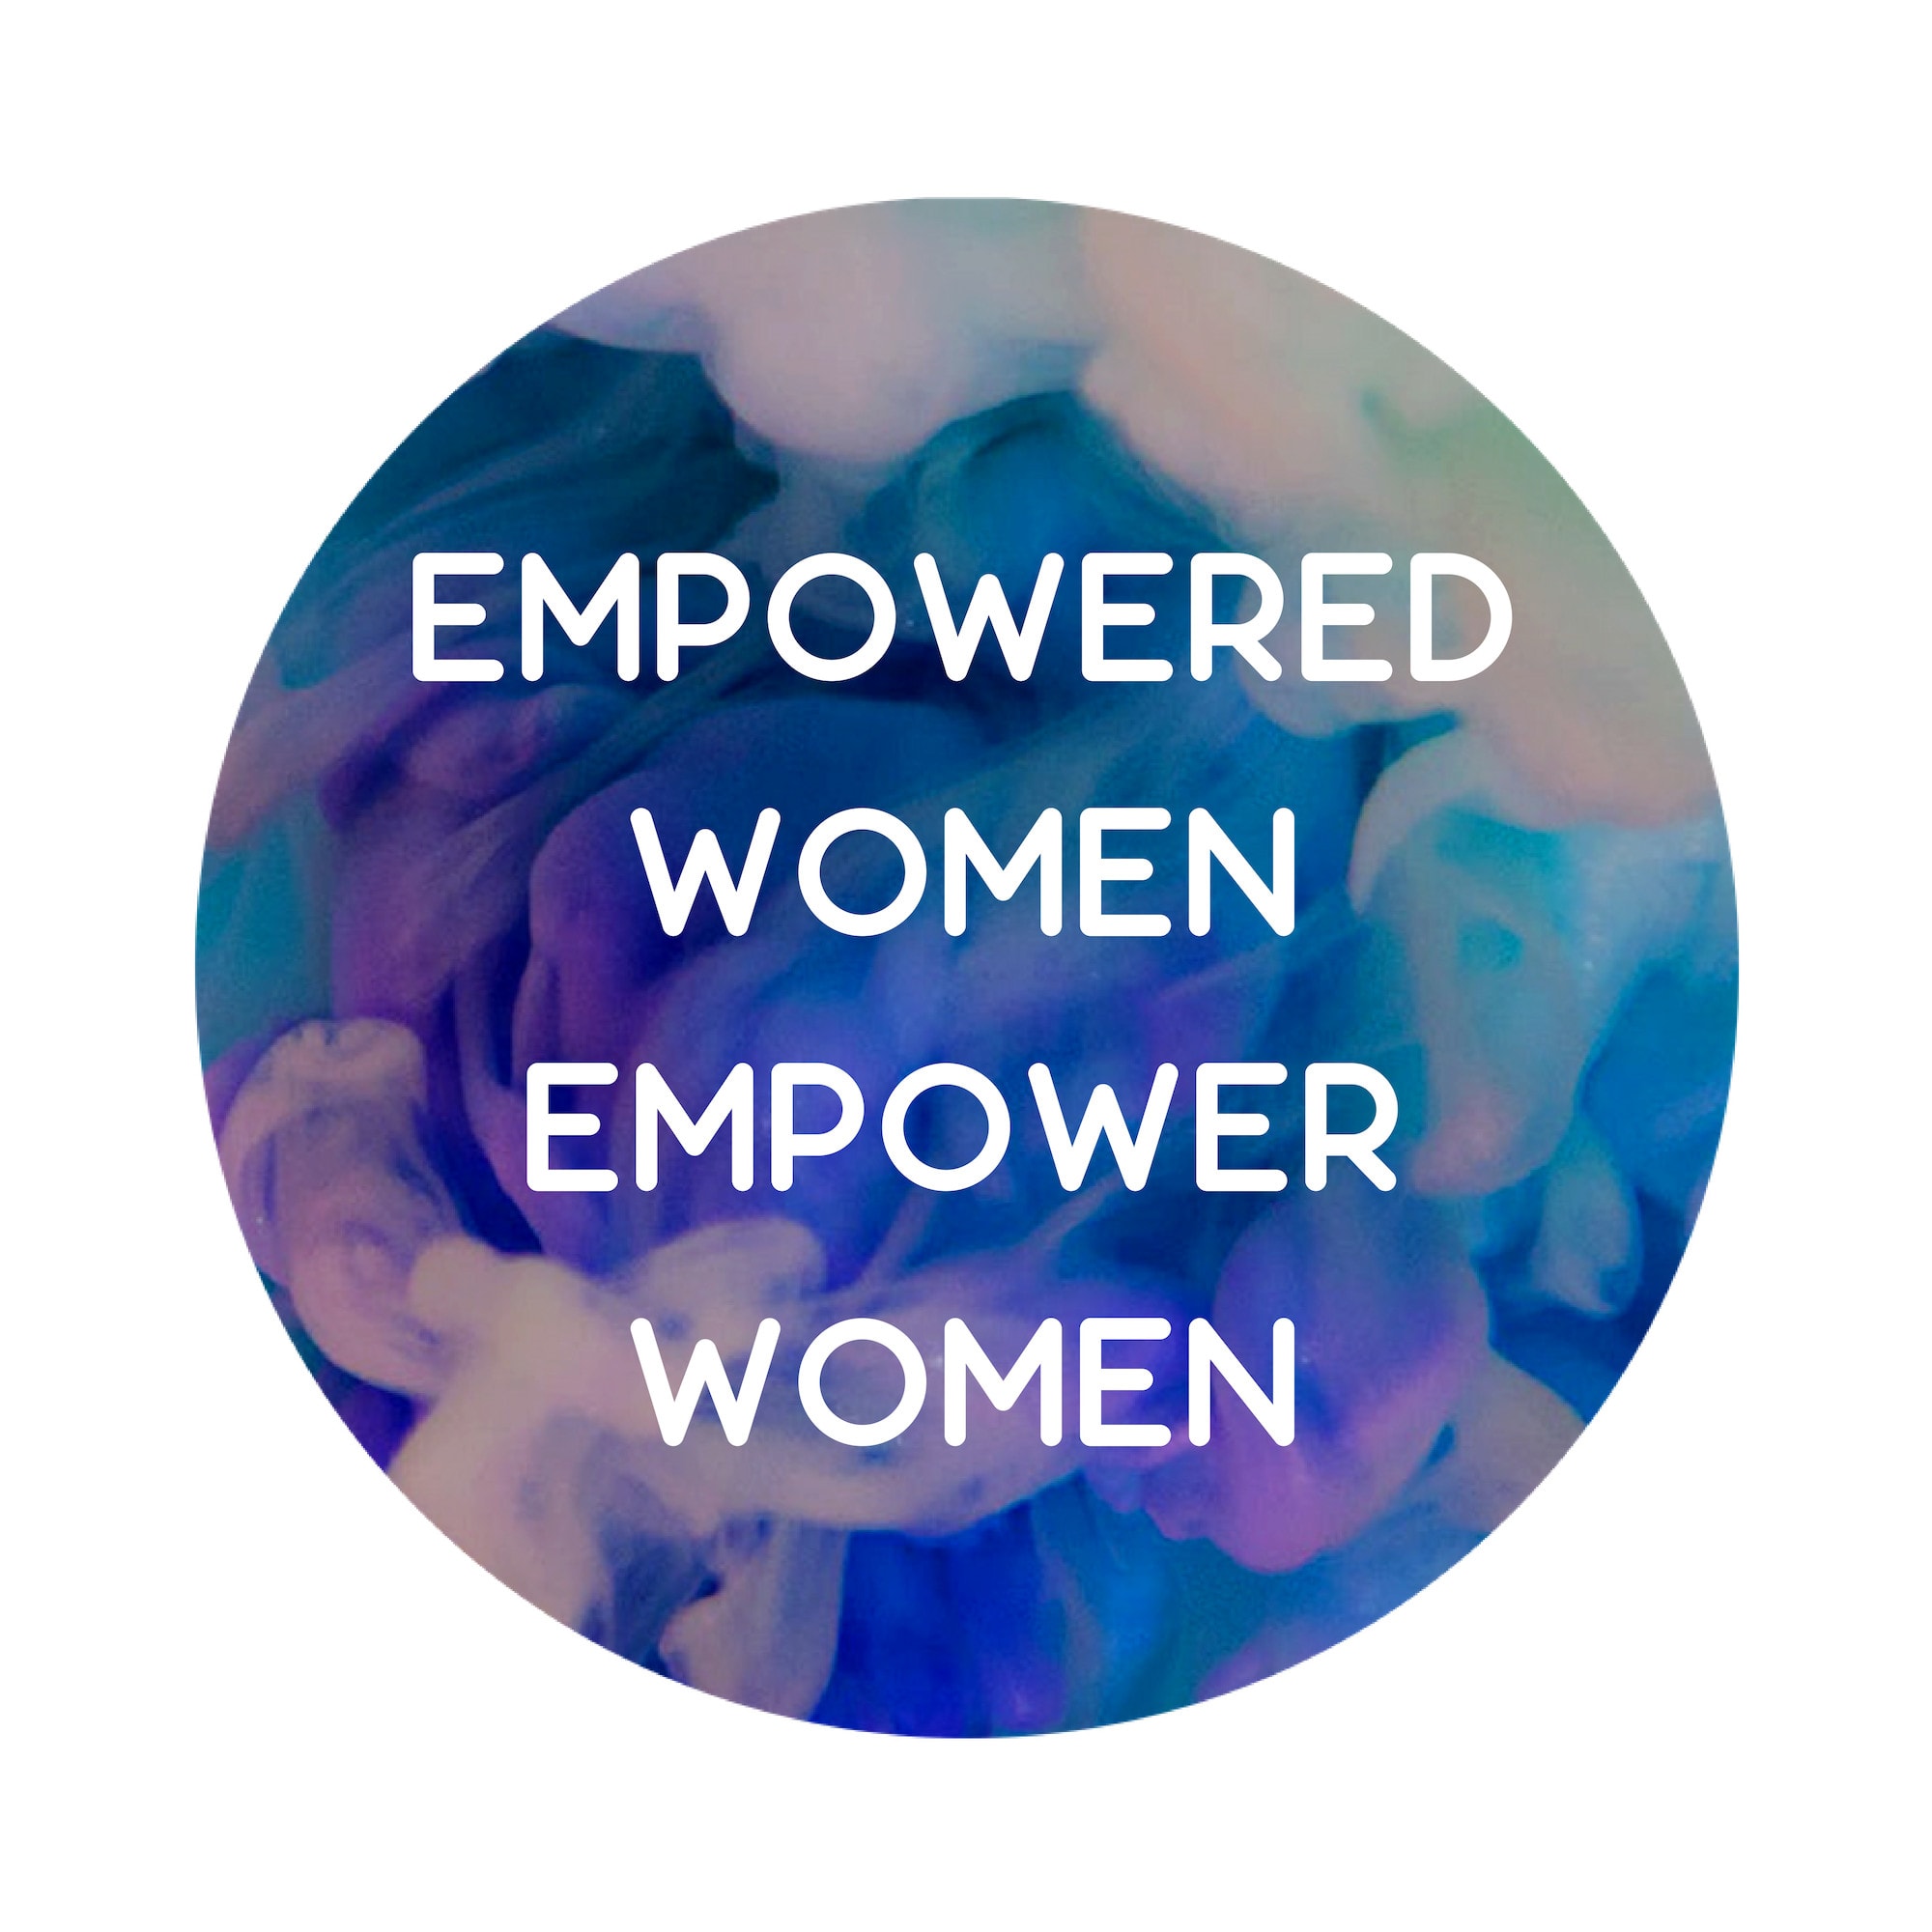 research and write women empowerment grant proposal